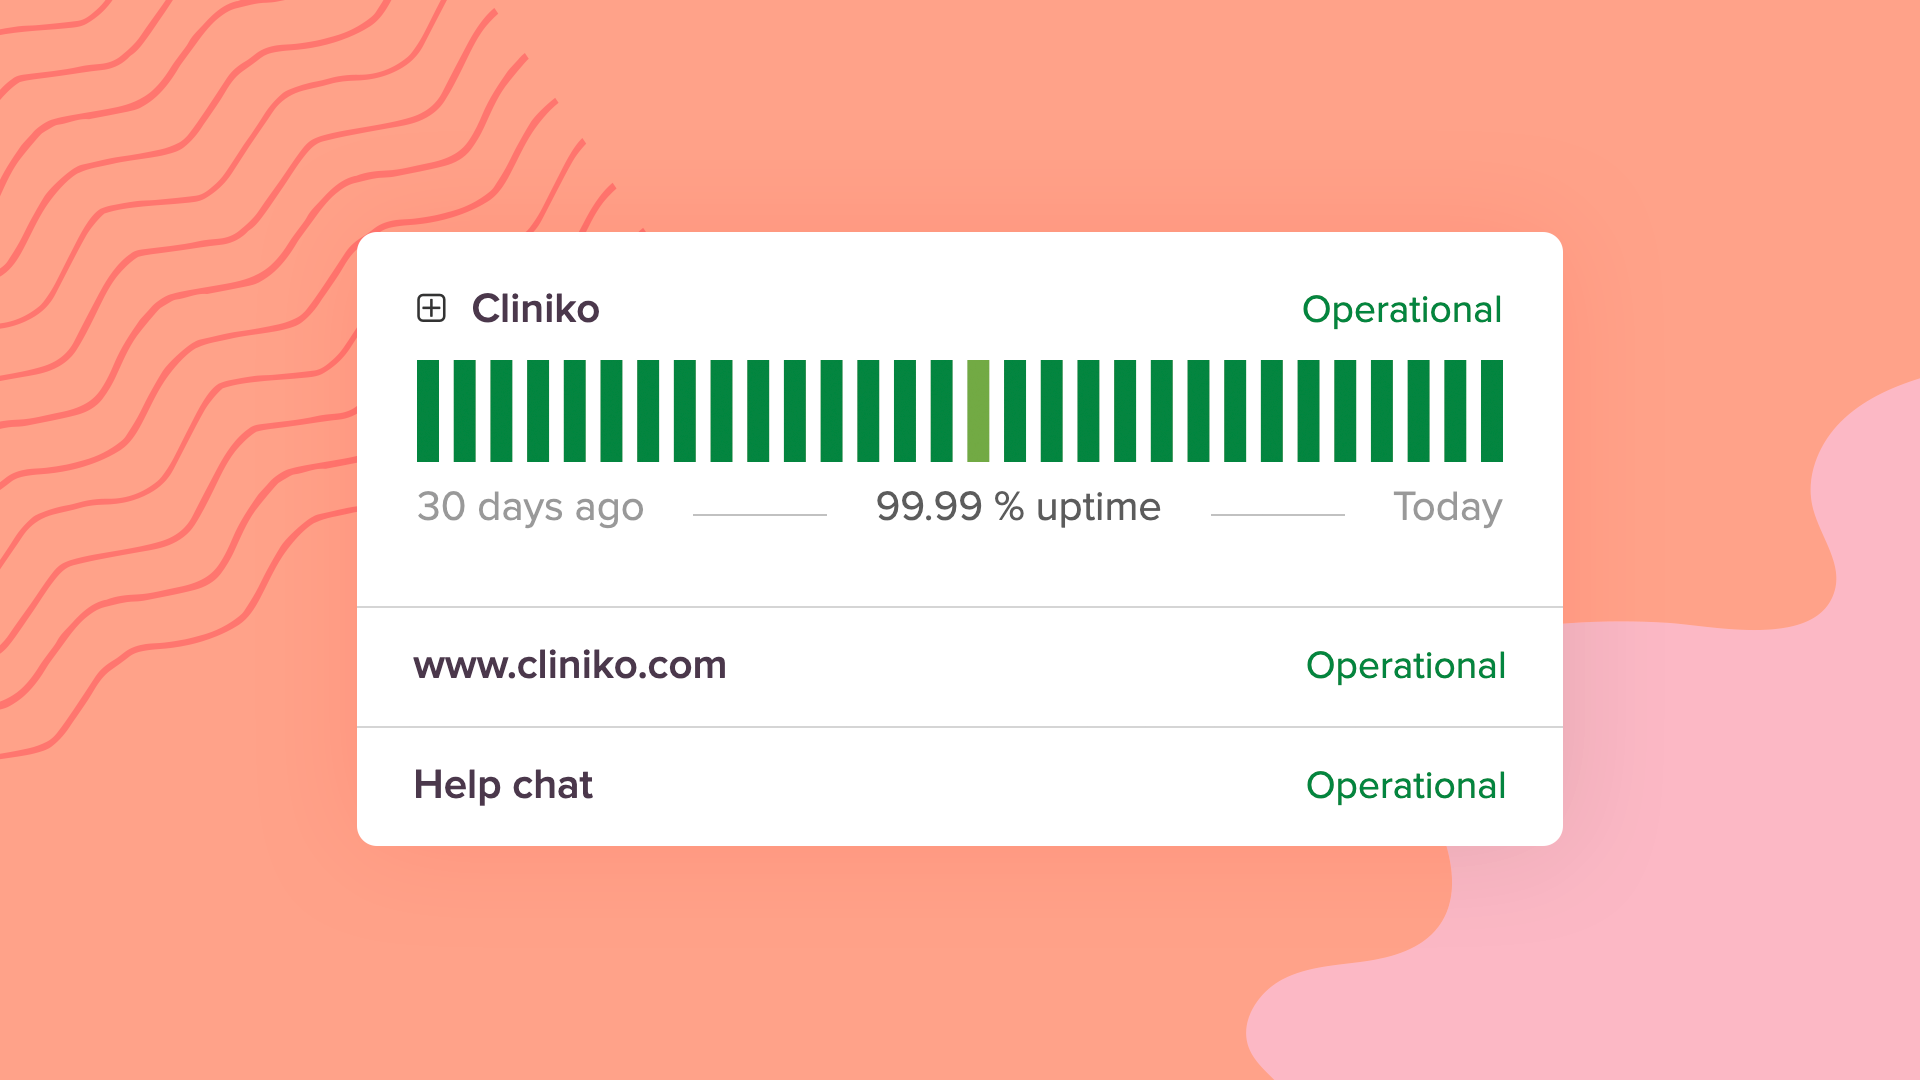 A screenshot of Cliniko's status page showing an example of 99.99% uptime in the last 30 days